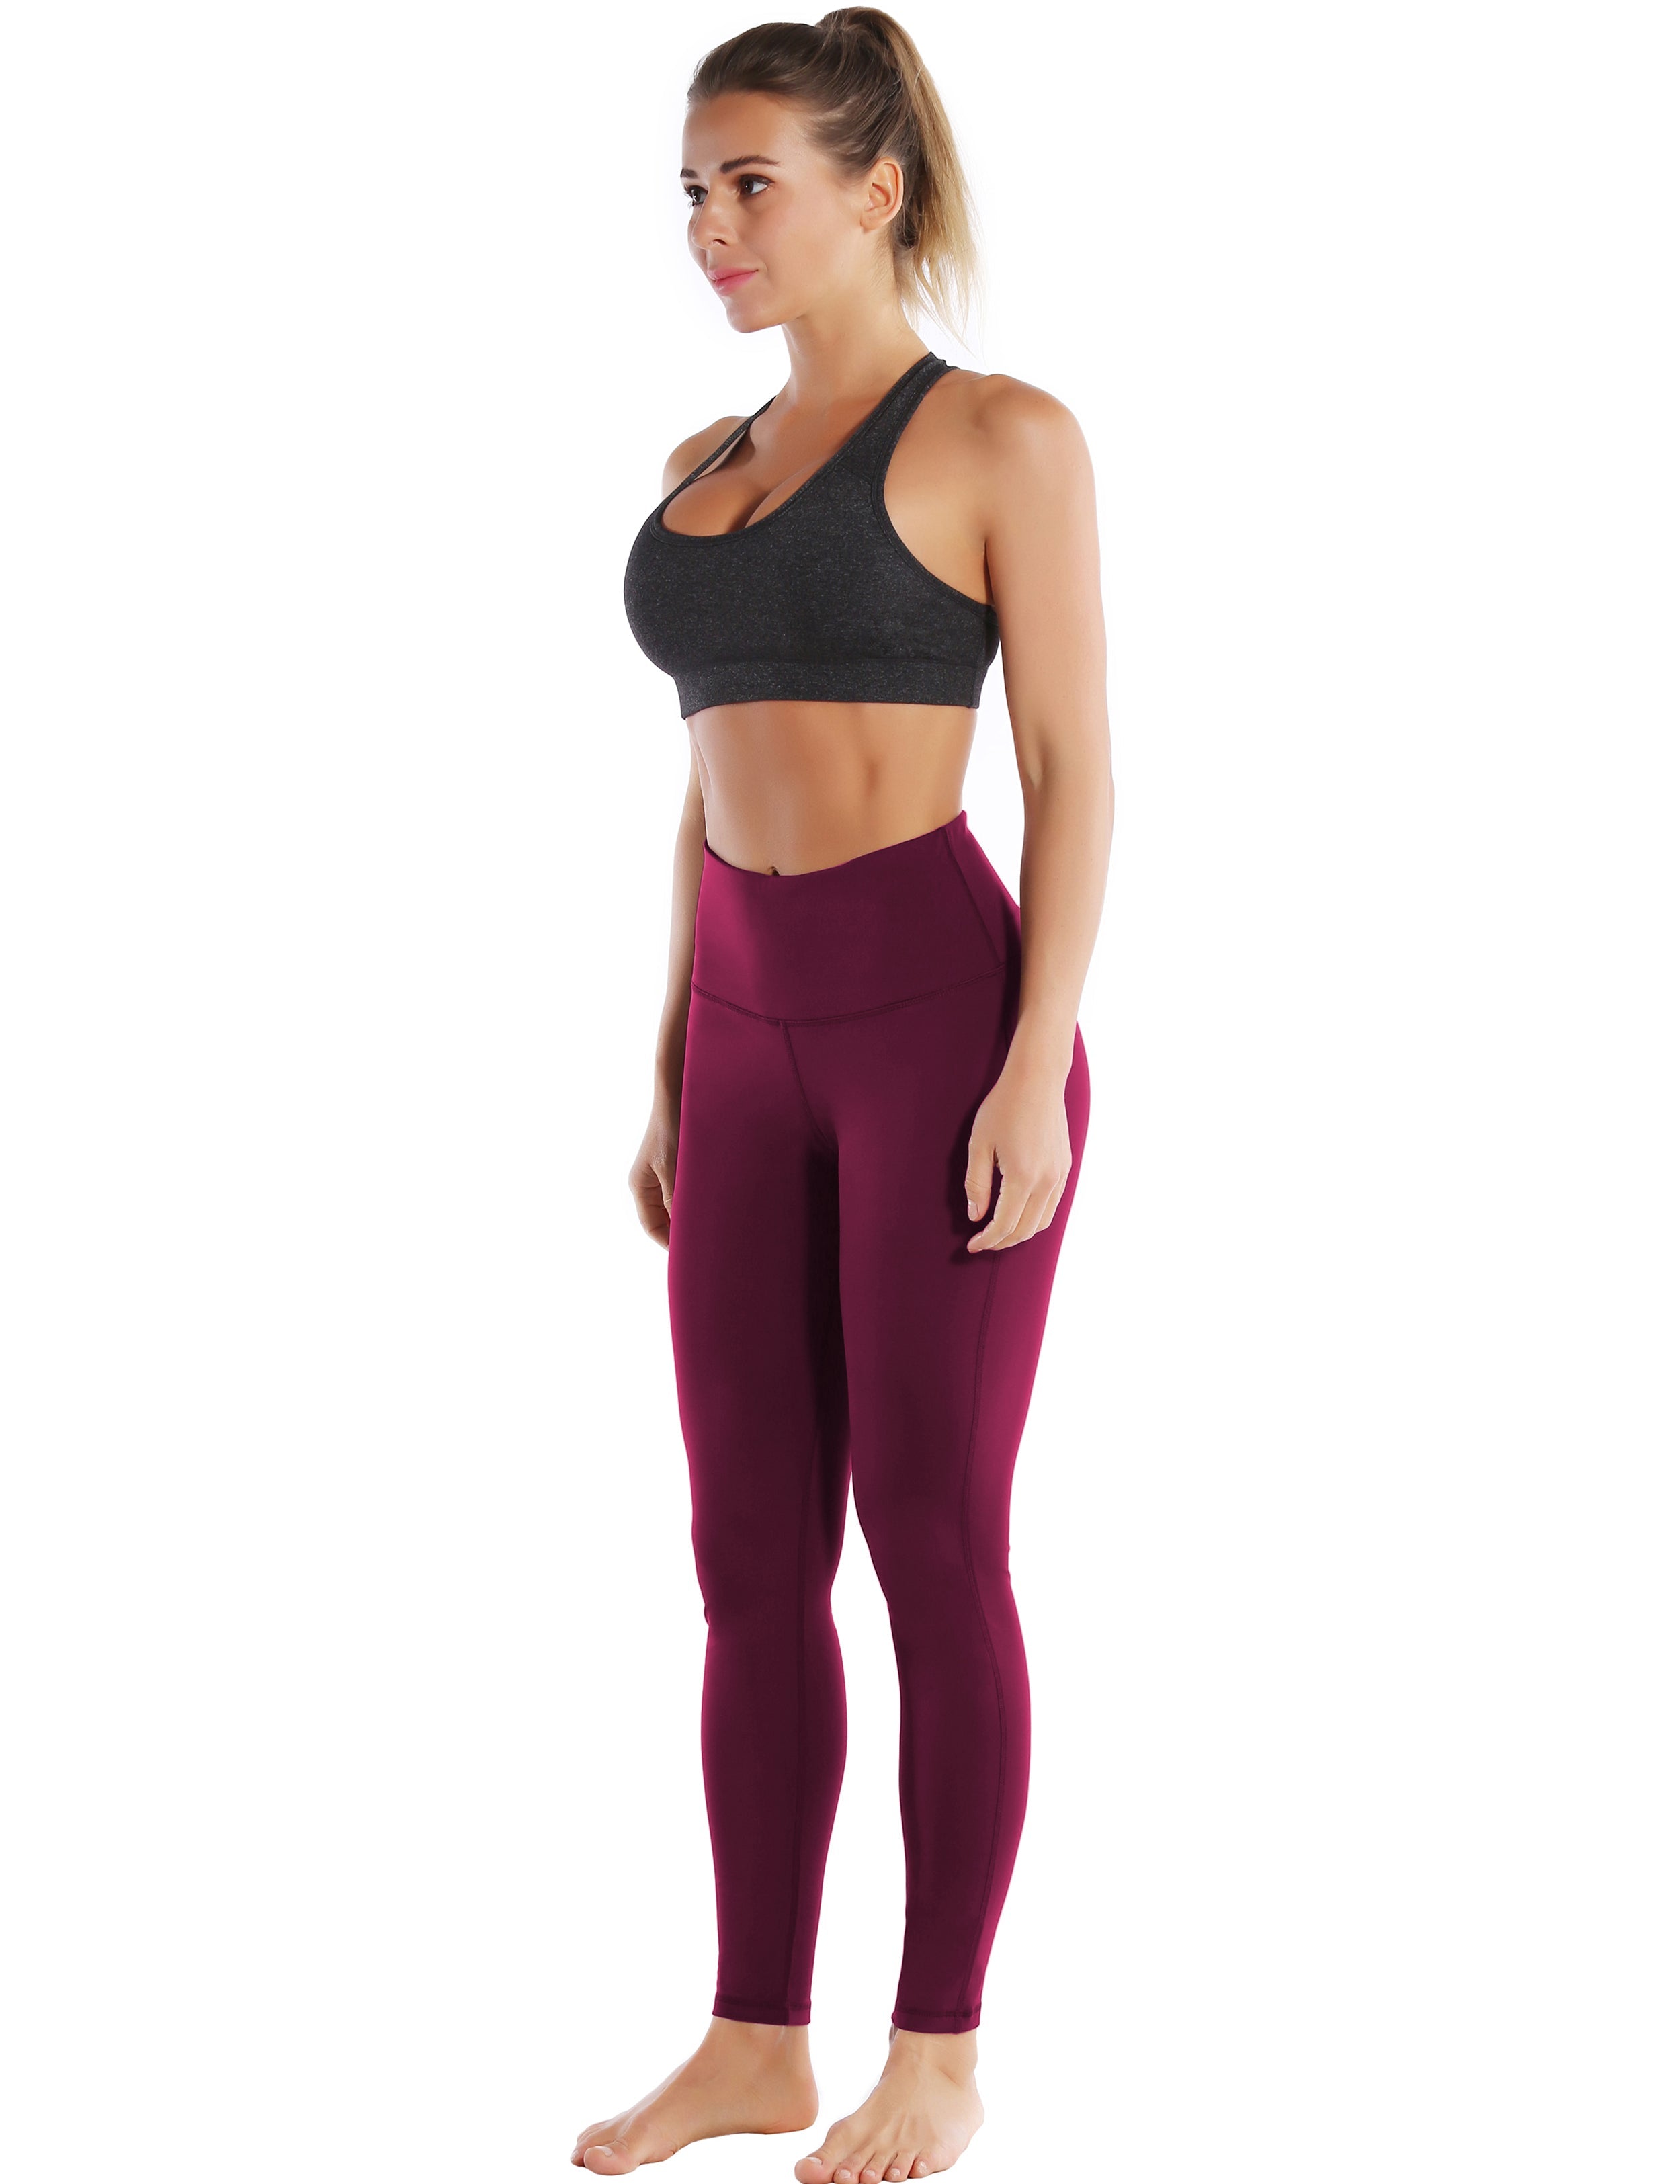 High Waist Side Line Biking Pants grapevine Side Line is Make Your Legs Look Longer and Thinner 75%Nylon/25%Spandex Fabric doesn't attract lint easily 4-way stretch No see-through Moisture-wicking Tummy control Inner pocket Two lengths